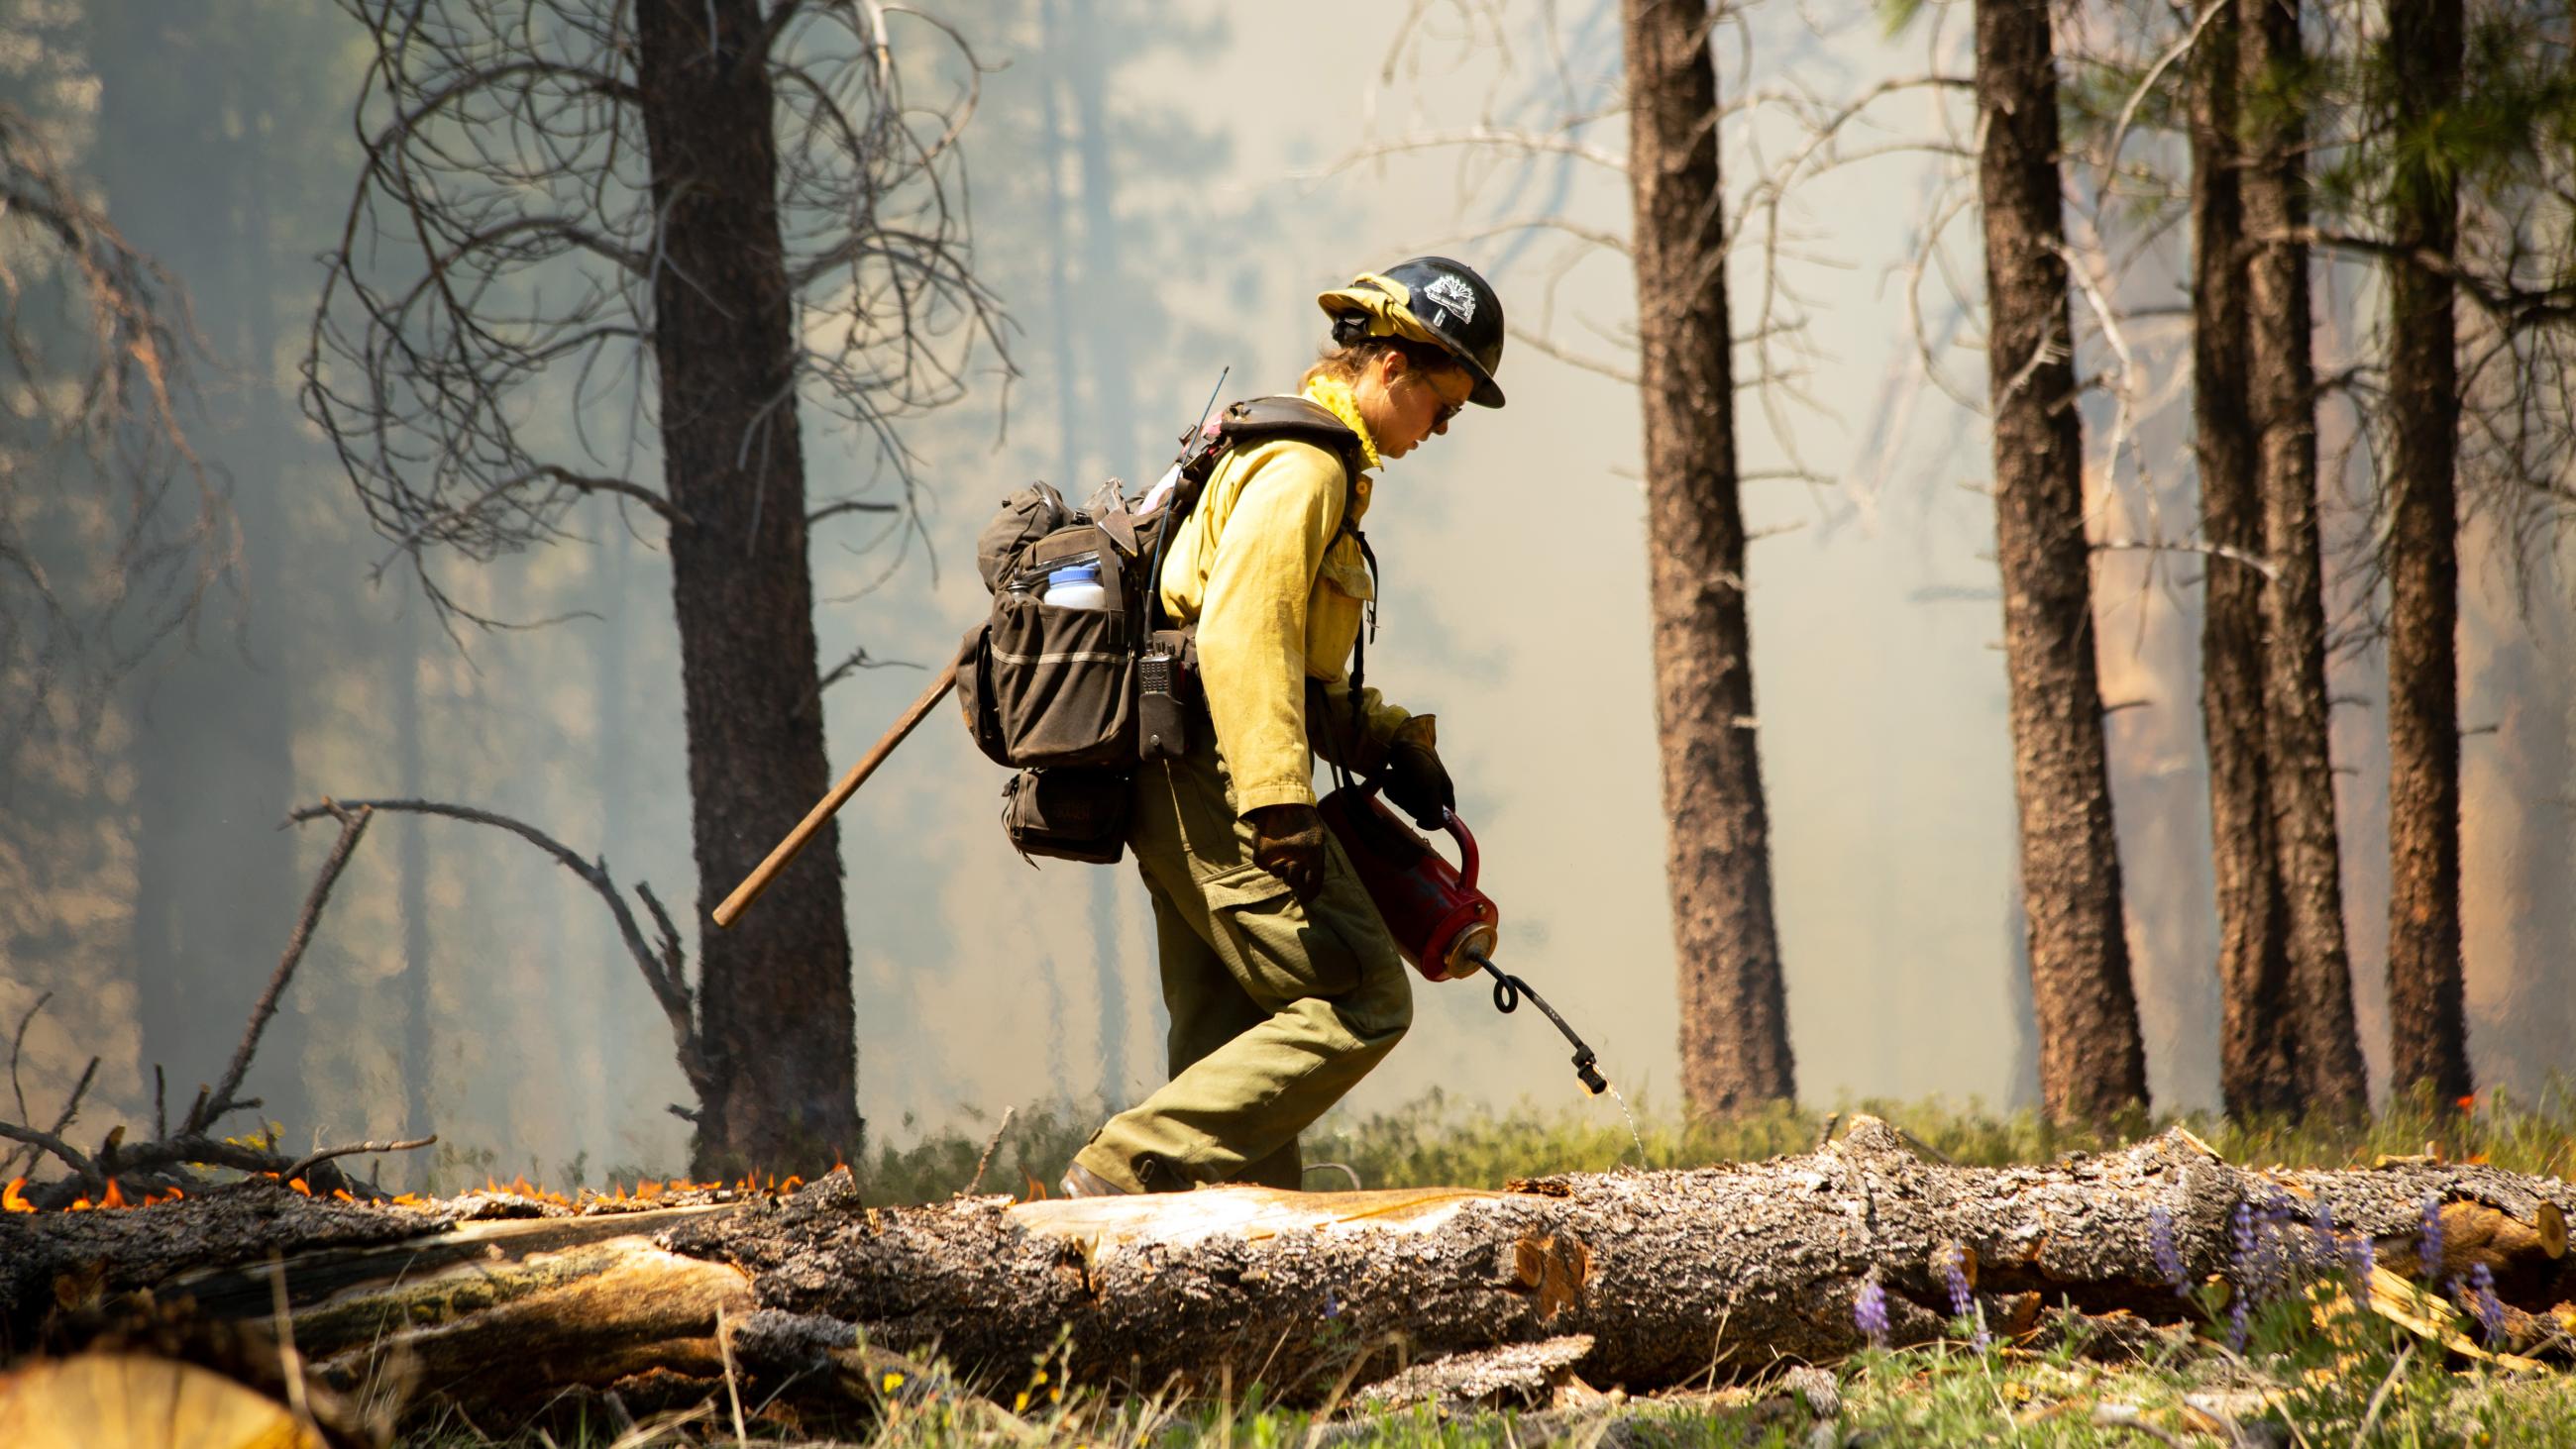 A firefighter wearing a yellow Nomex shirt carries a drip torch across the forest floor.